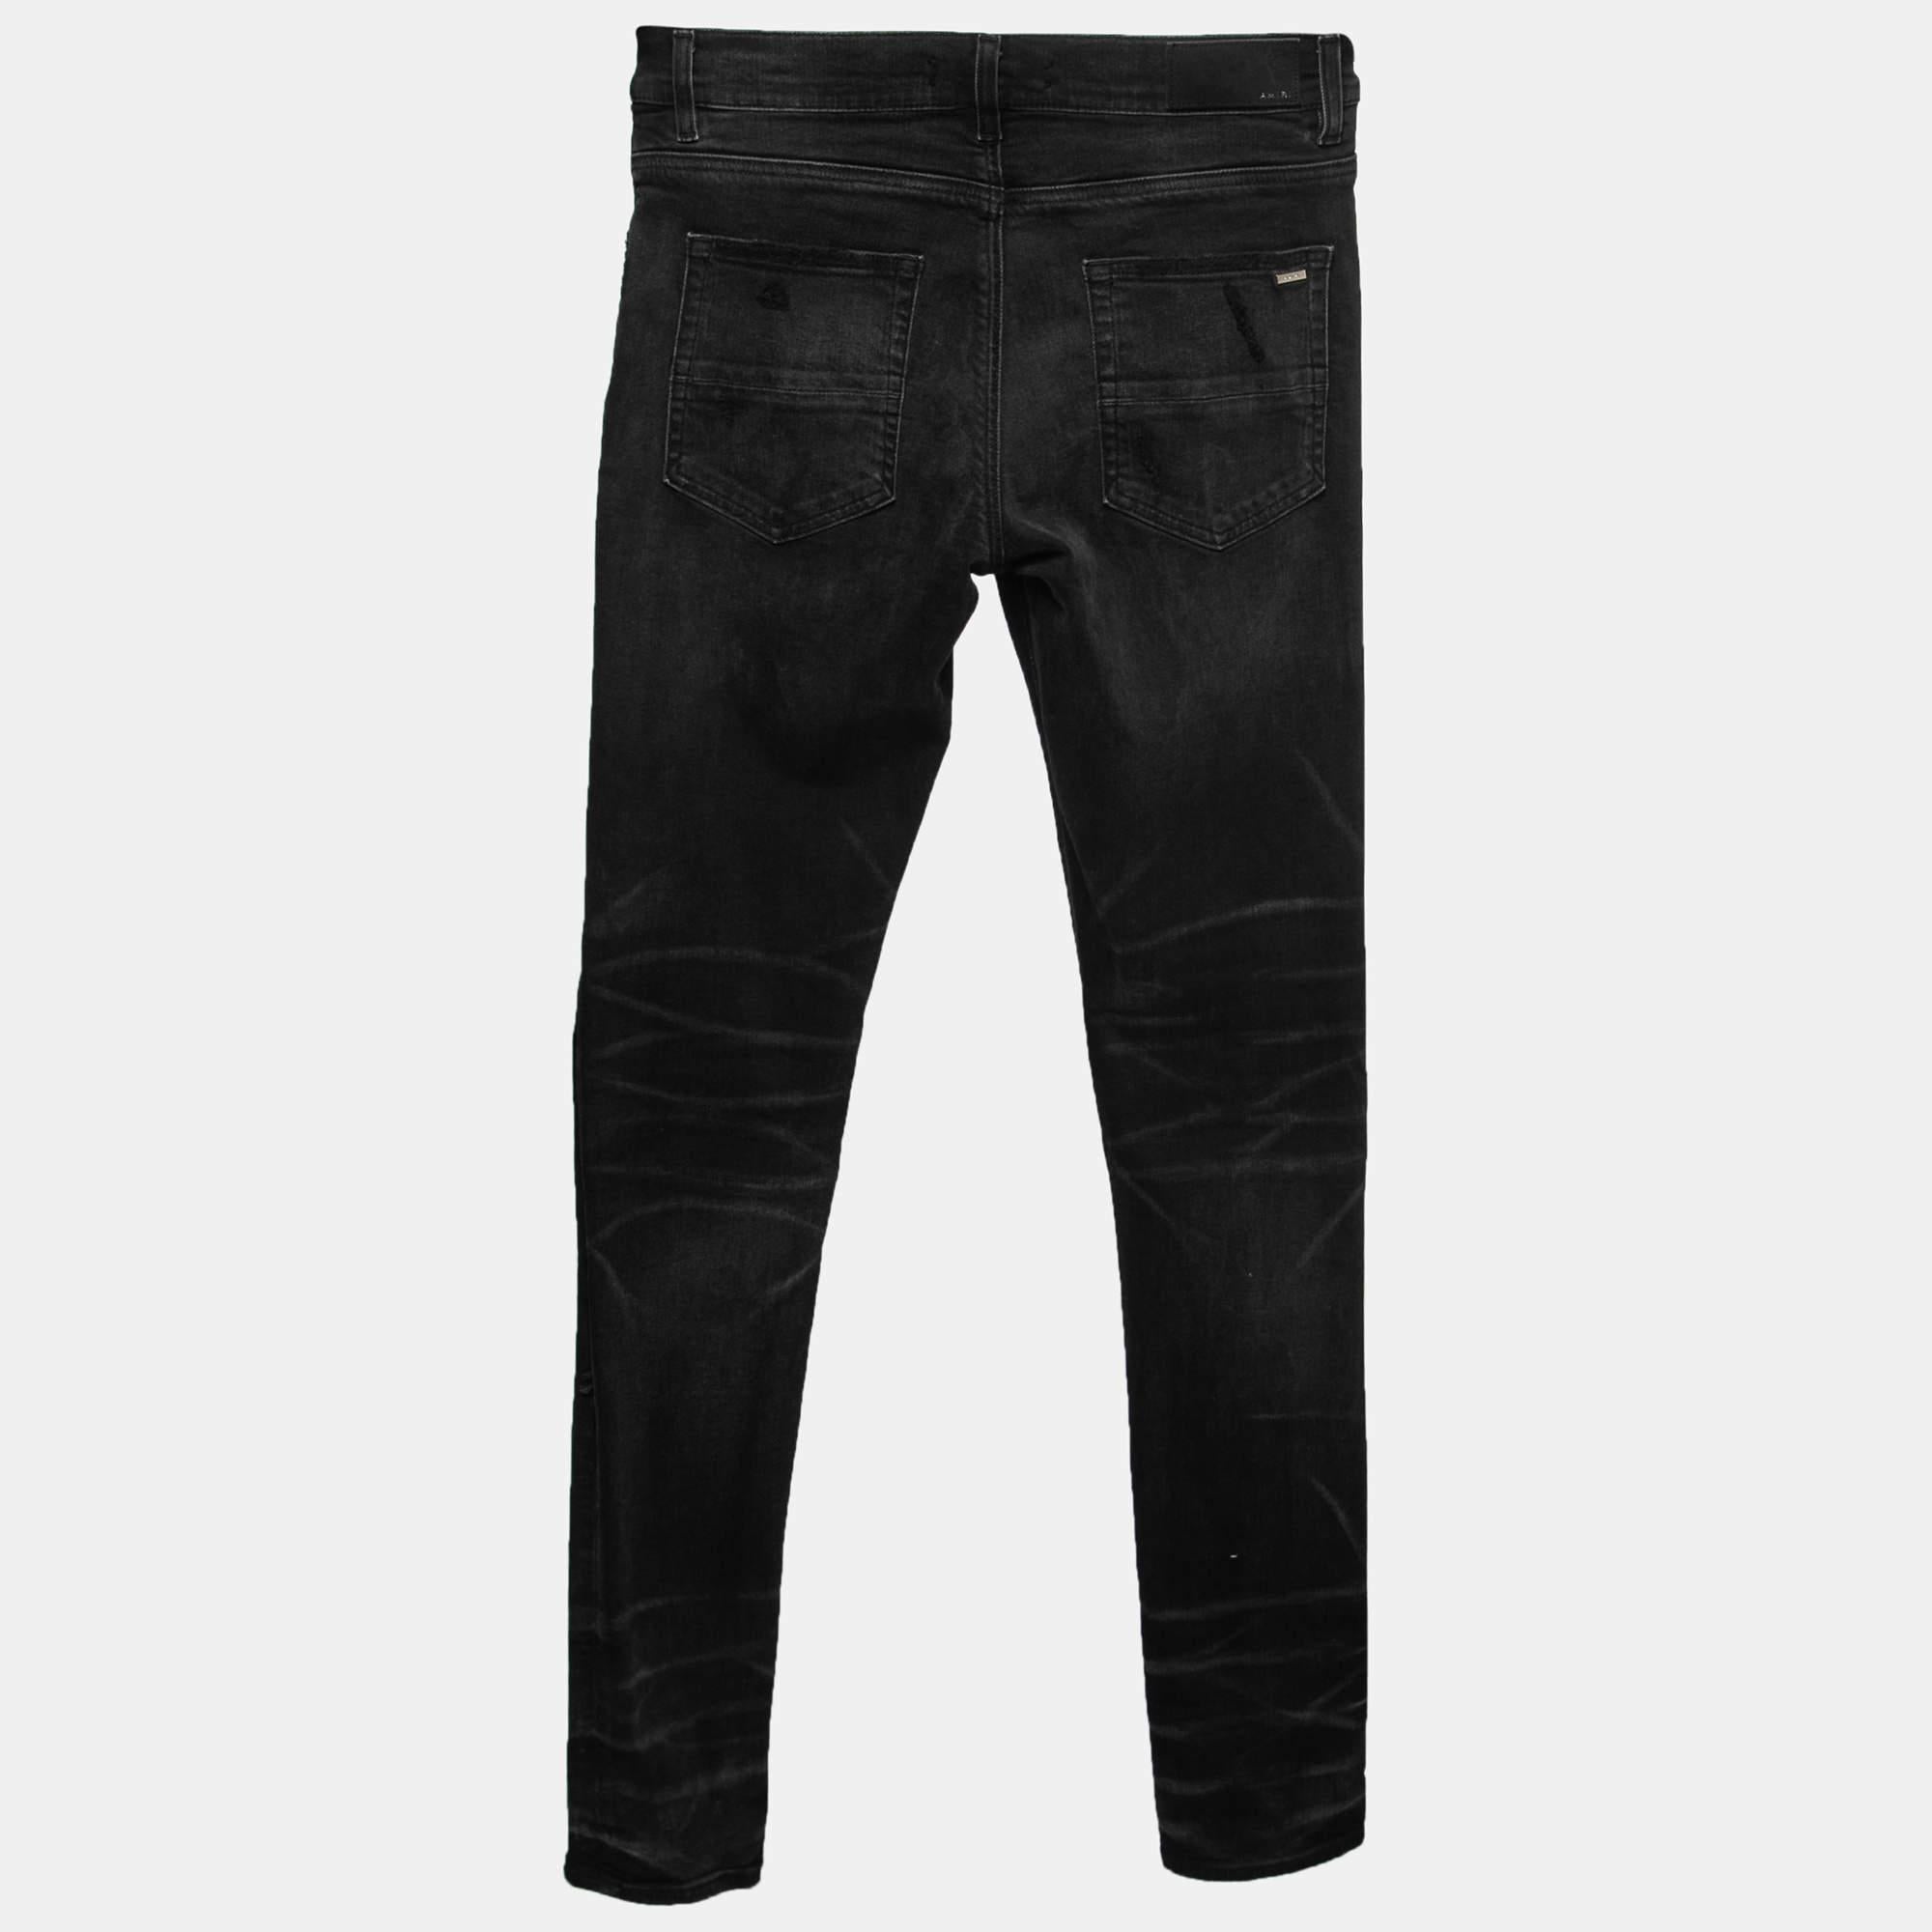 A must-have for your casual wardrobe, these Amiri jeans are made of denim offering a comfortable wearing experience. They carry a black hue with a distressed finish. These well-fitting jeans have multiple pockets and a buttoned closure.

